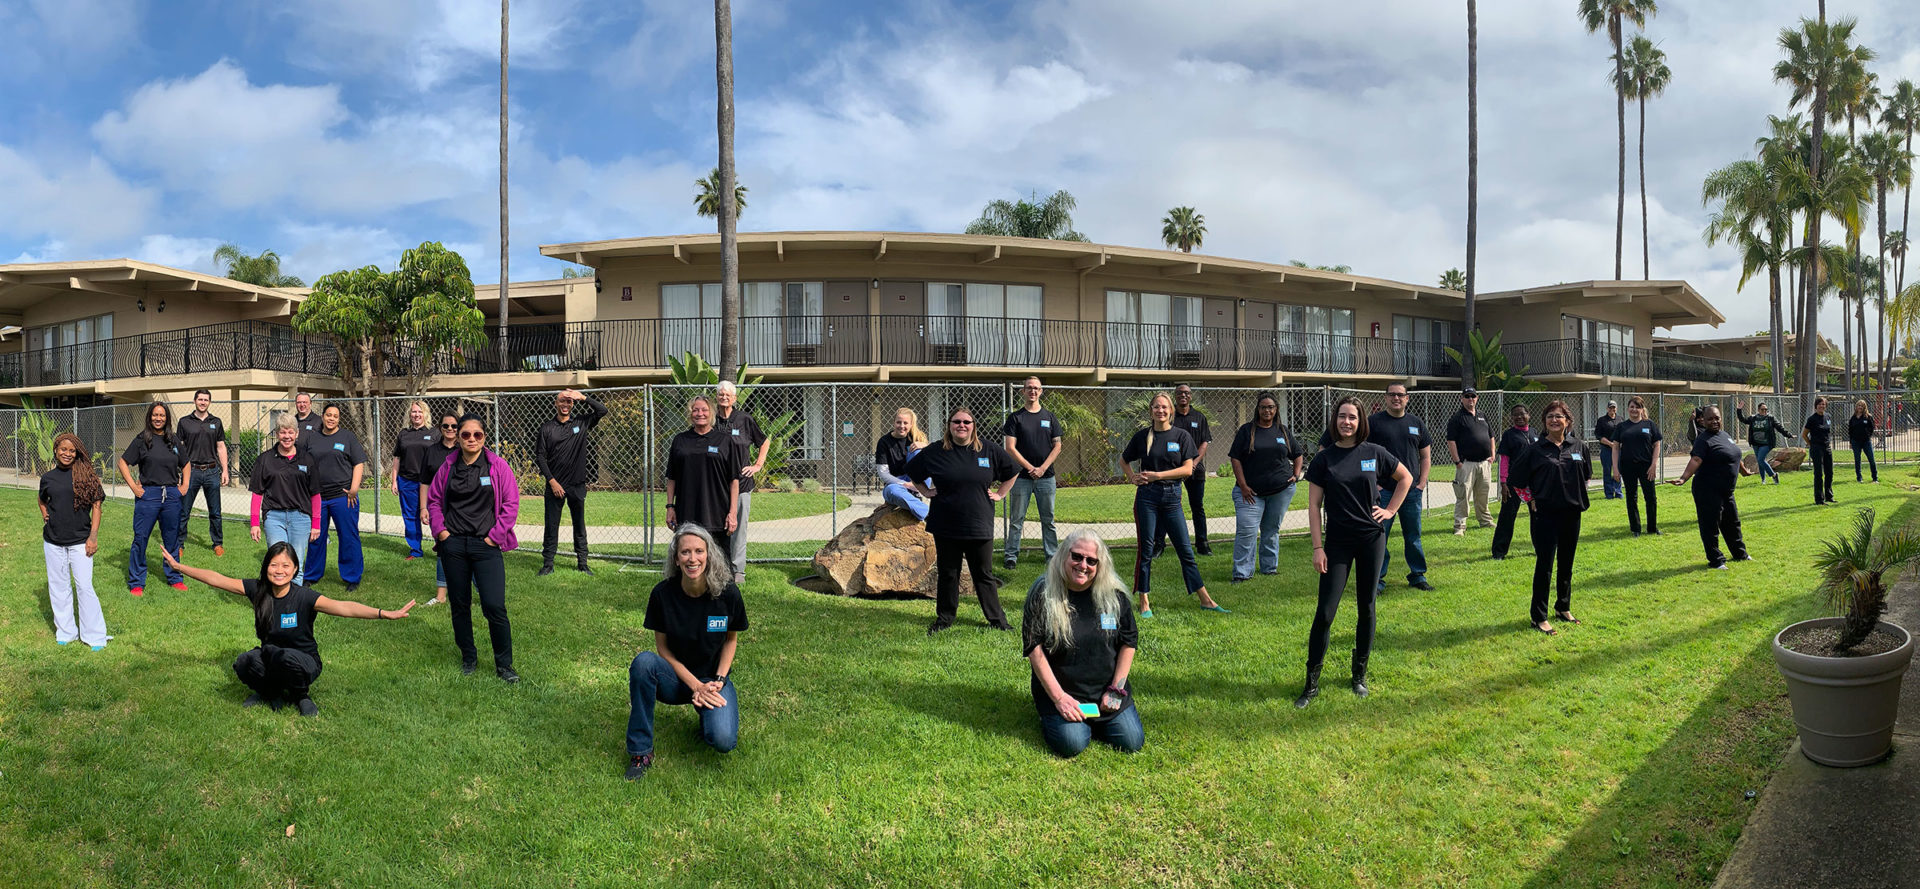 AMI Expeditionary Healthcare staff in San Diego on the frontlines of COVID19